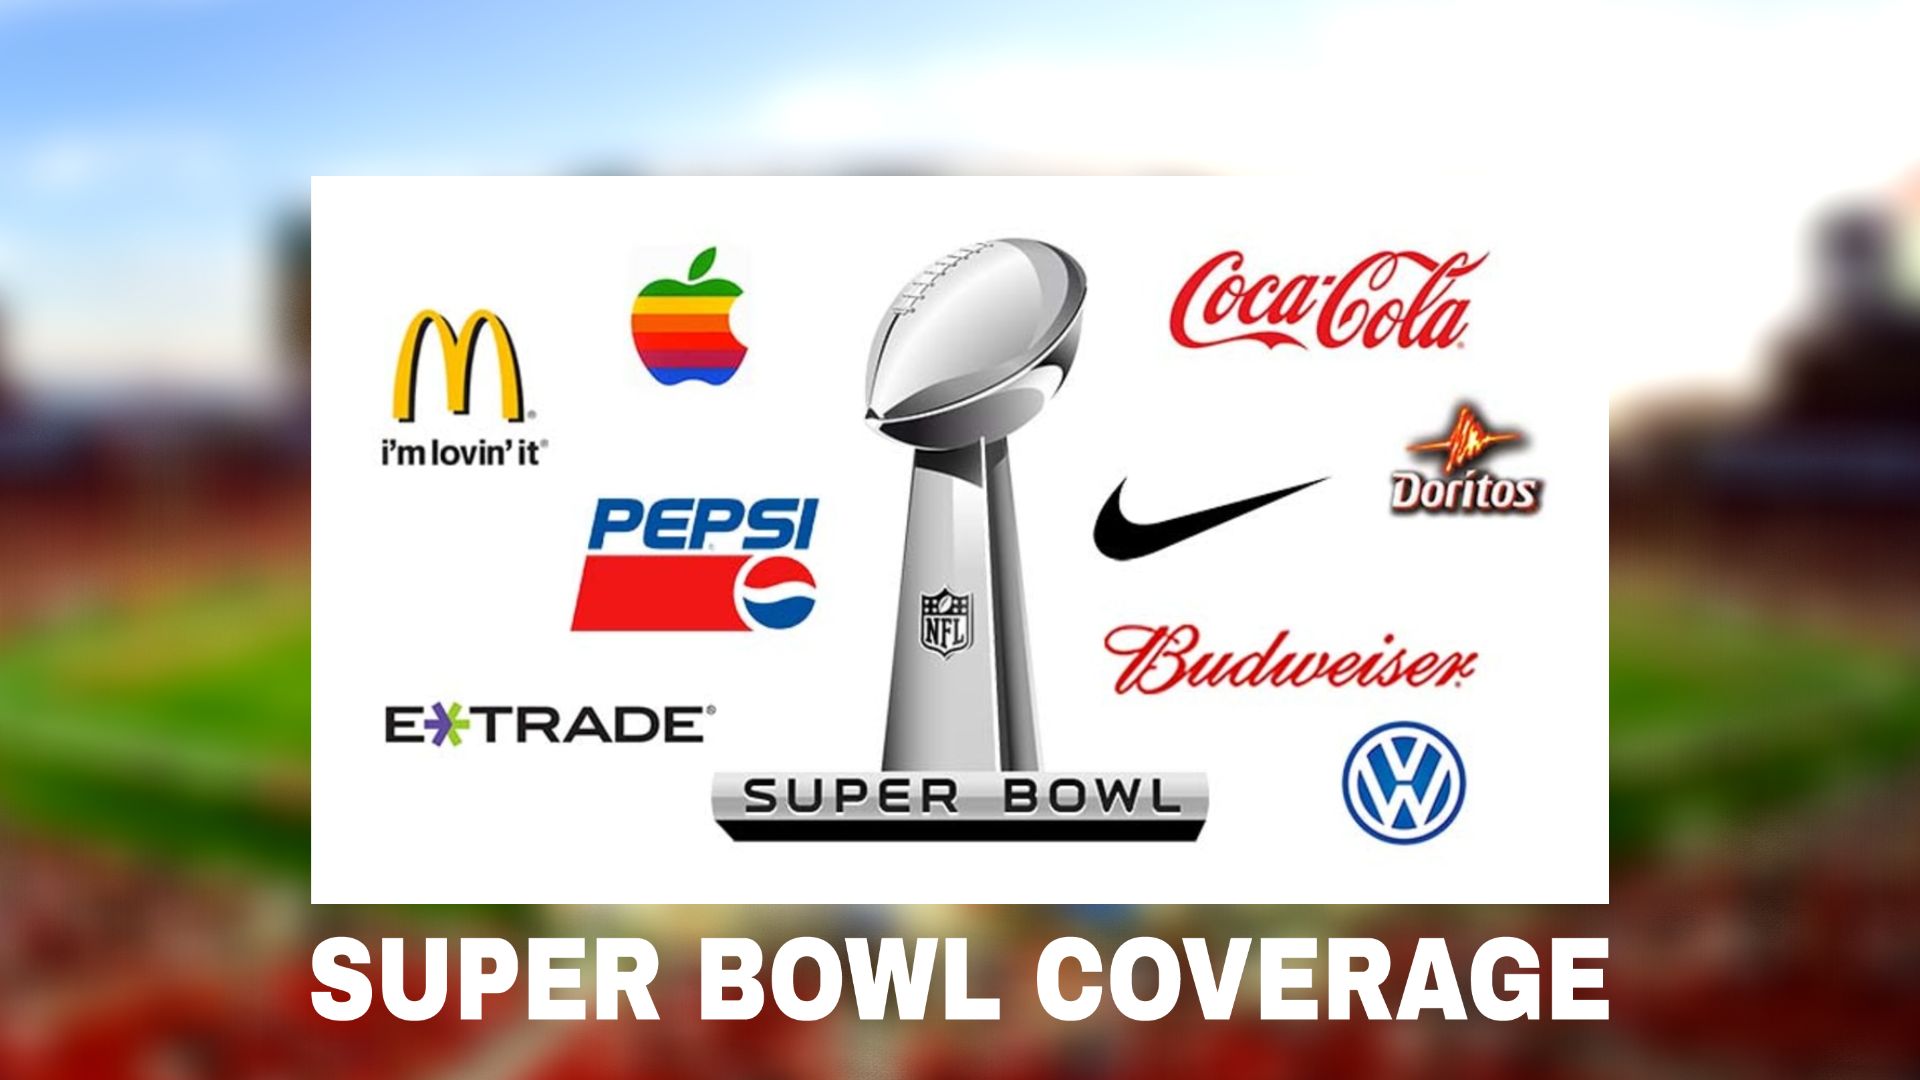 20 Best Super Bowl Commercials Of All Time